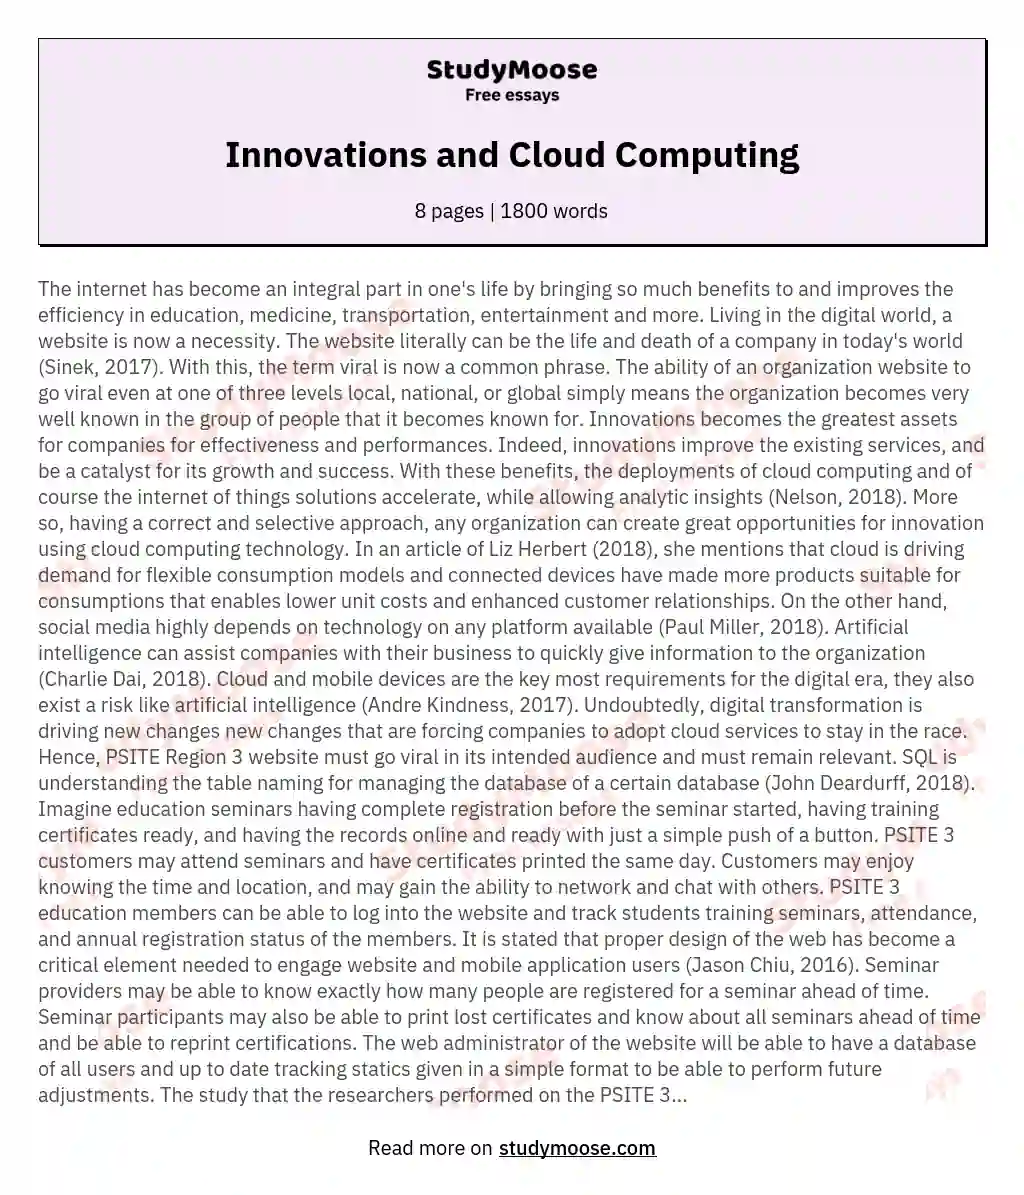 Innovations and Cloud Computing essay